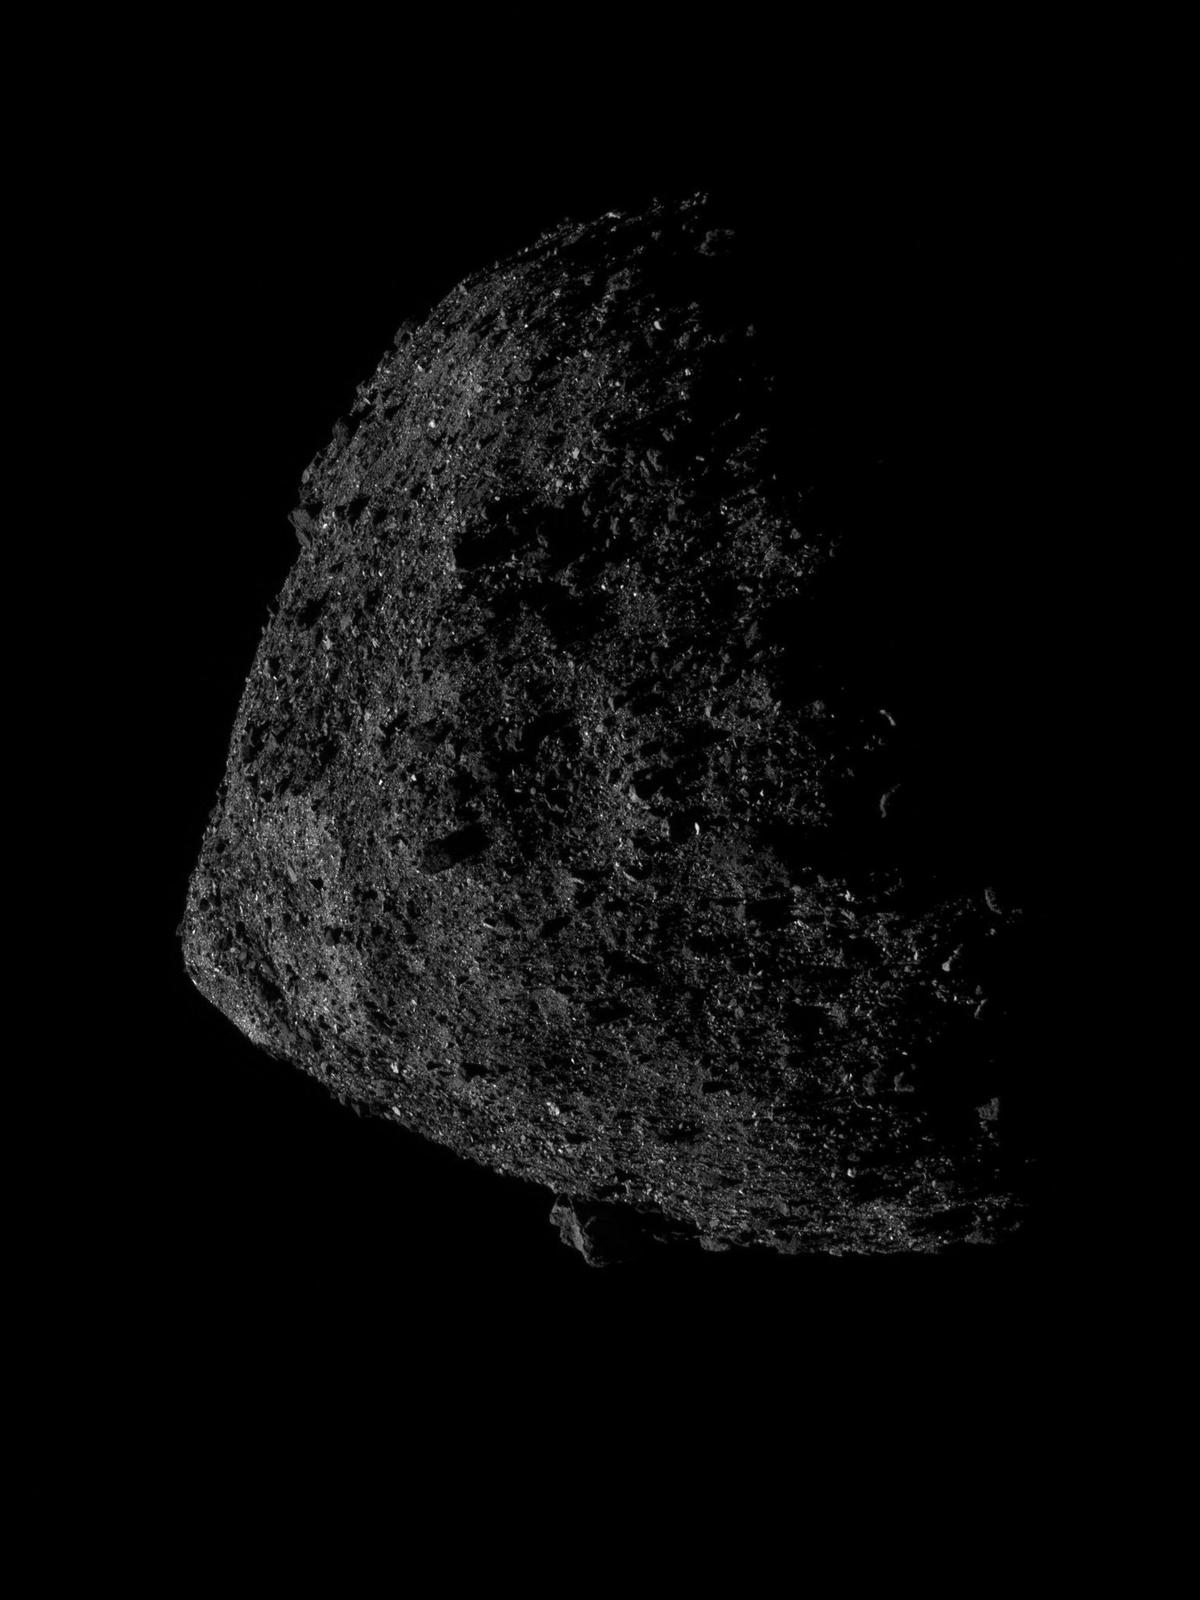 NASA spacecraft cruising back to Earth with asteroid sample: All about the historic mission